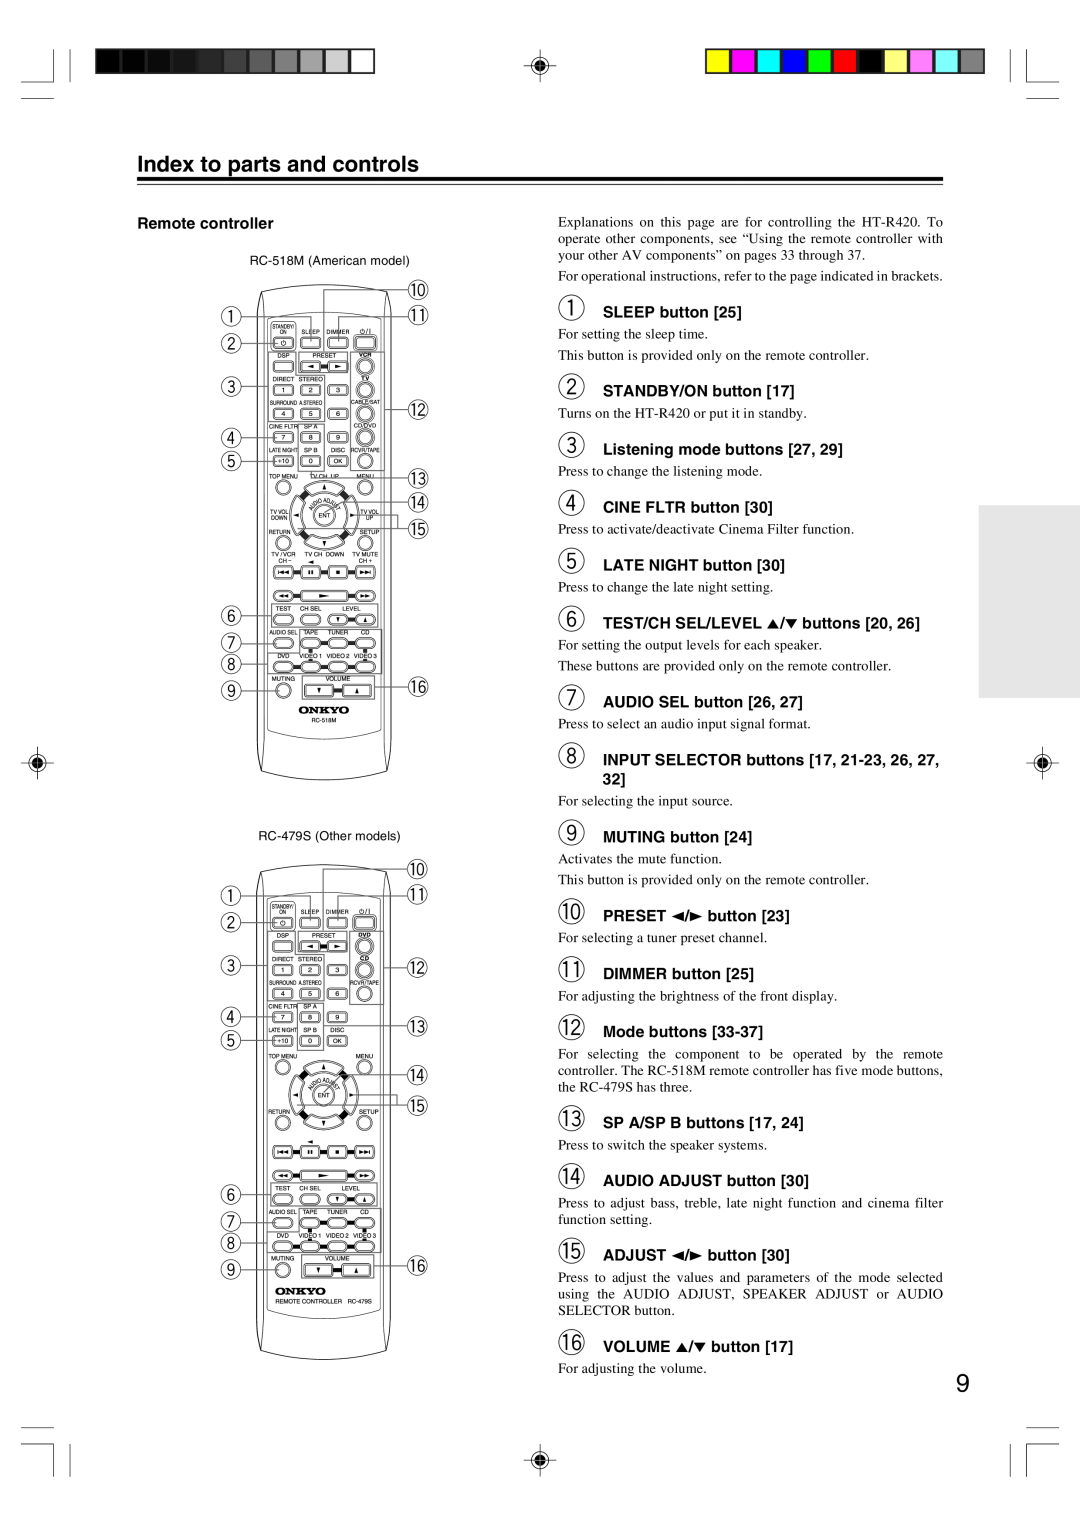 Onkyo HT-R420 appendix Index to parts and controls 